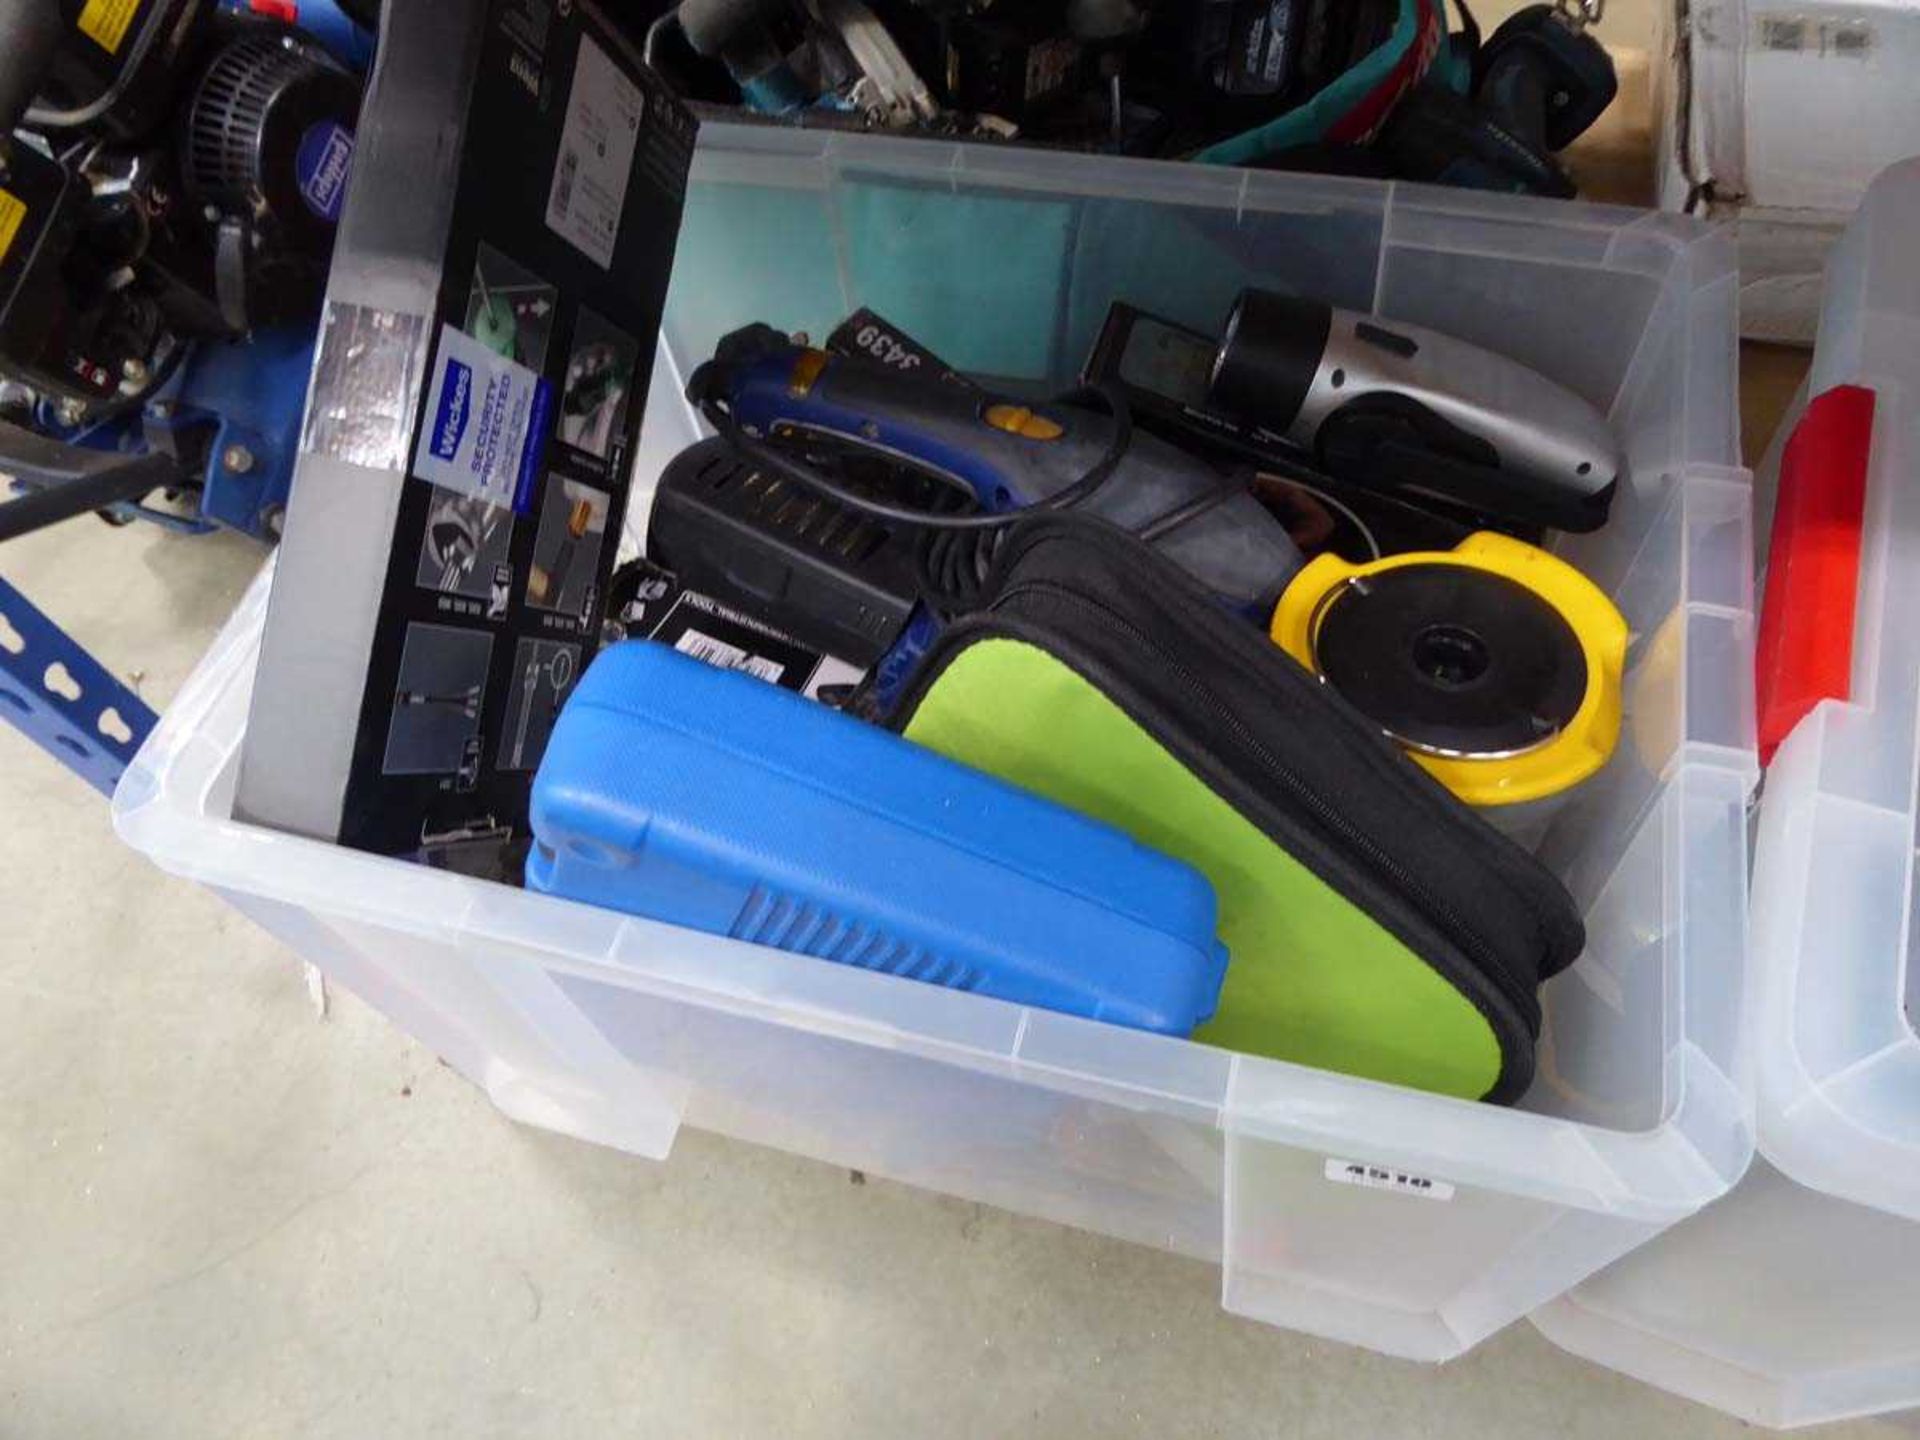 Plastic crate containing Wera screwdrivers, torch, lantern, sanders and various other tools - Image 2 of 2